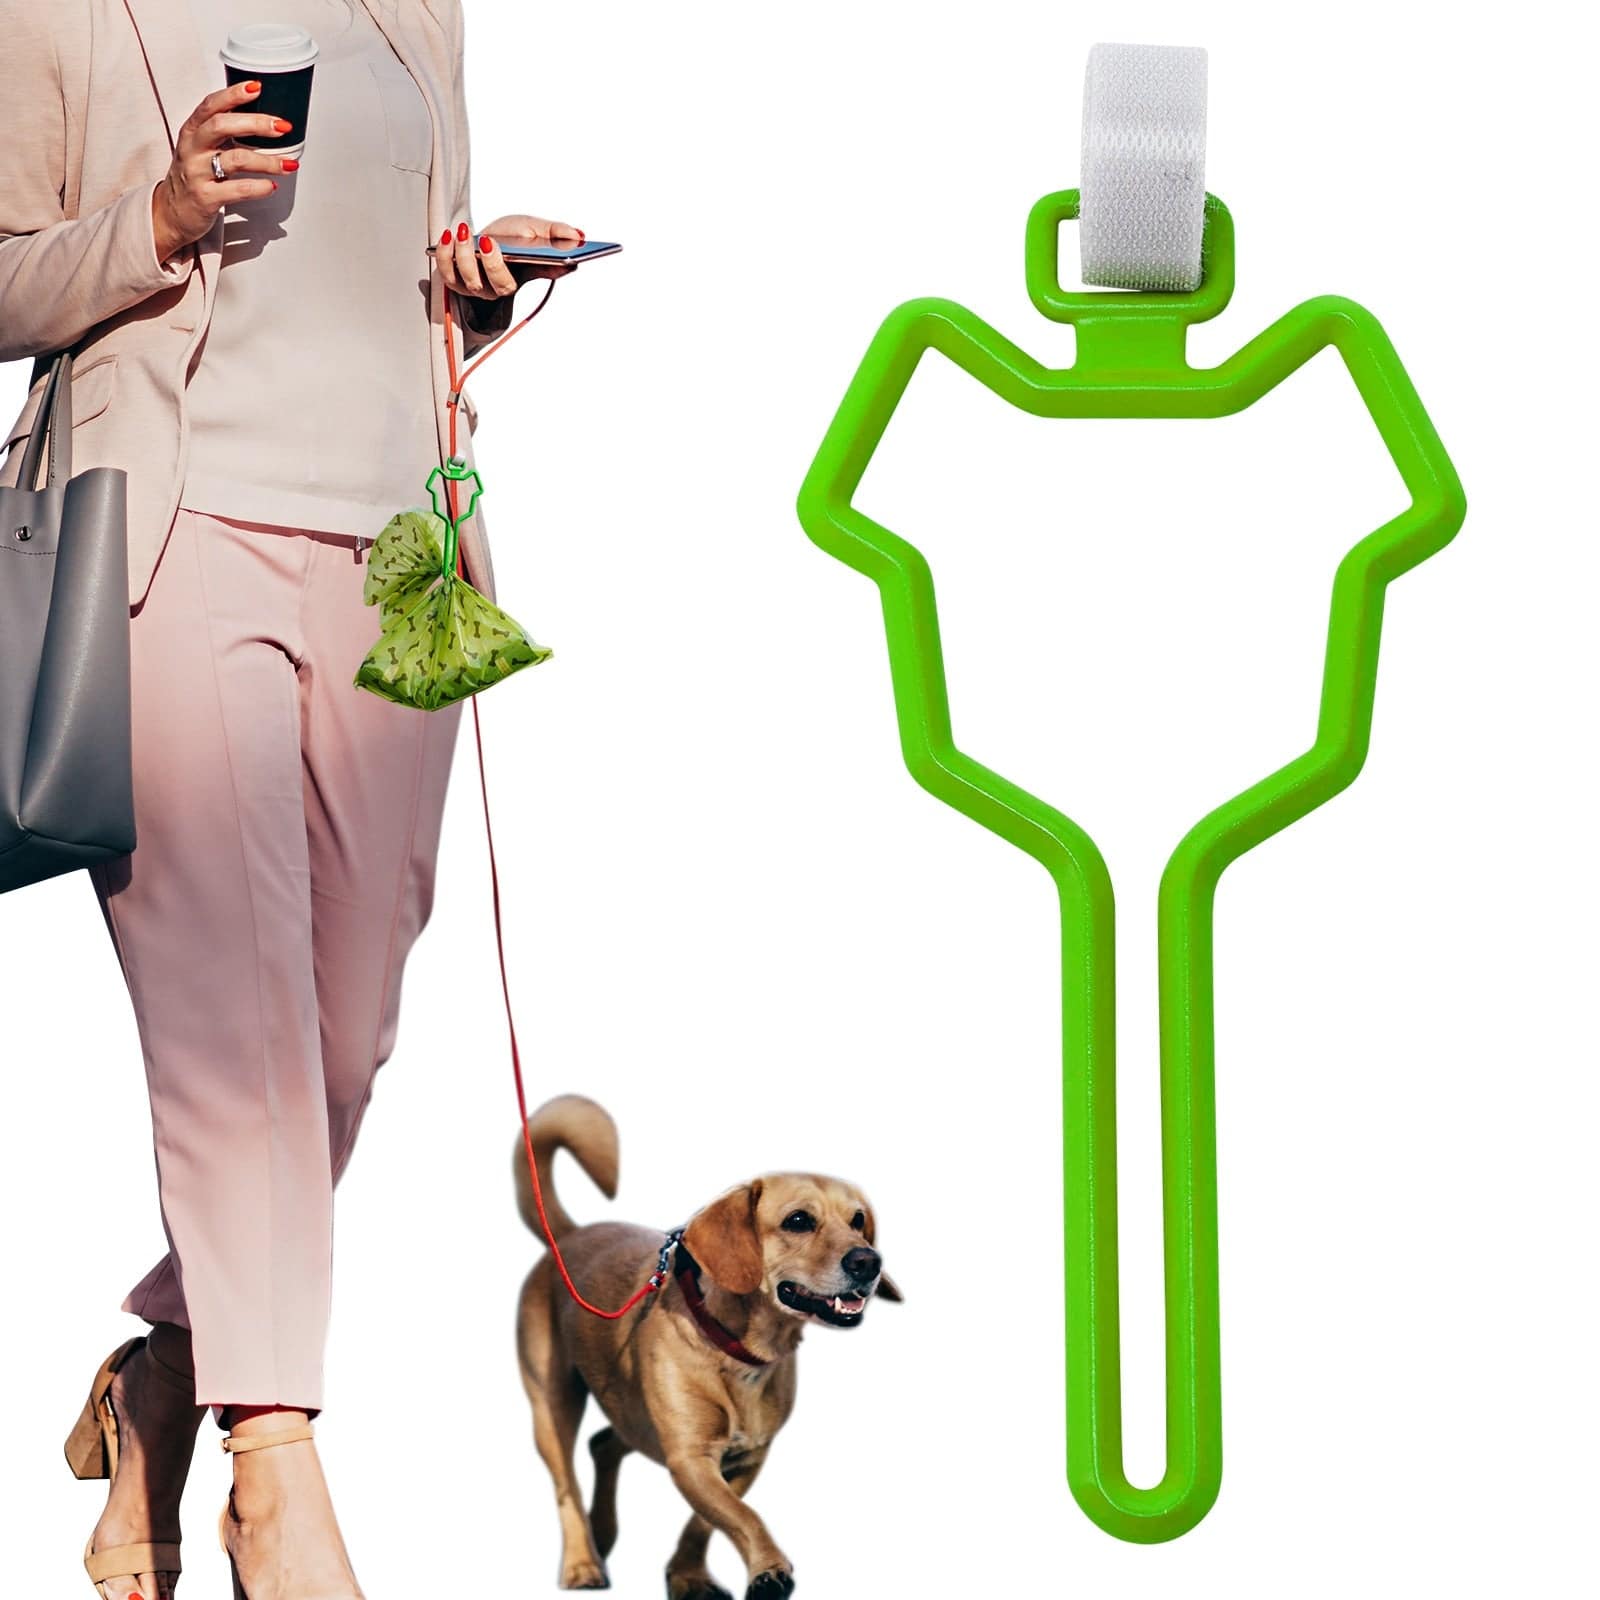 Hands-Free Holder for Dog Poop bag - FREE TODAY ONLY - Classy Pet Life